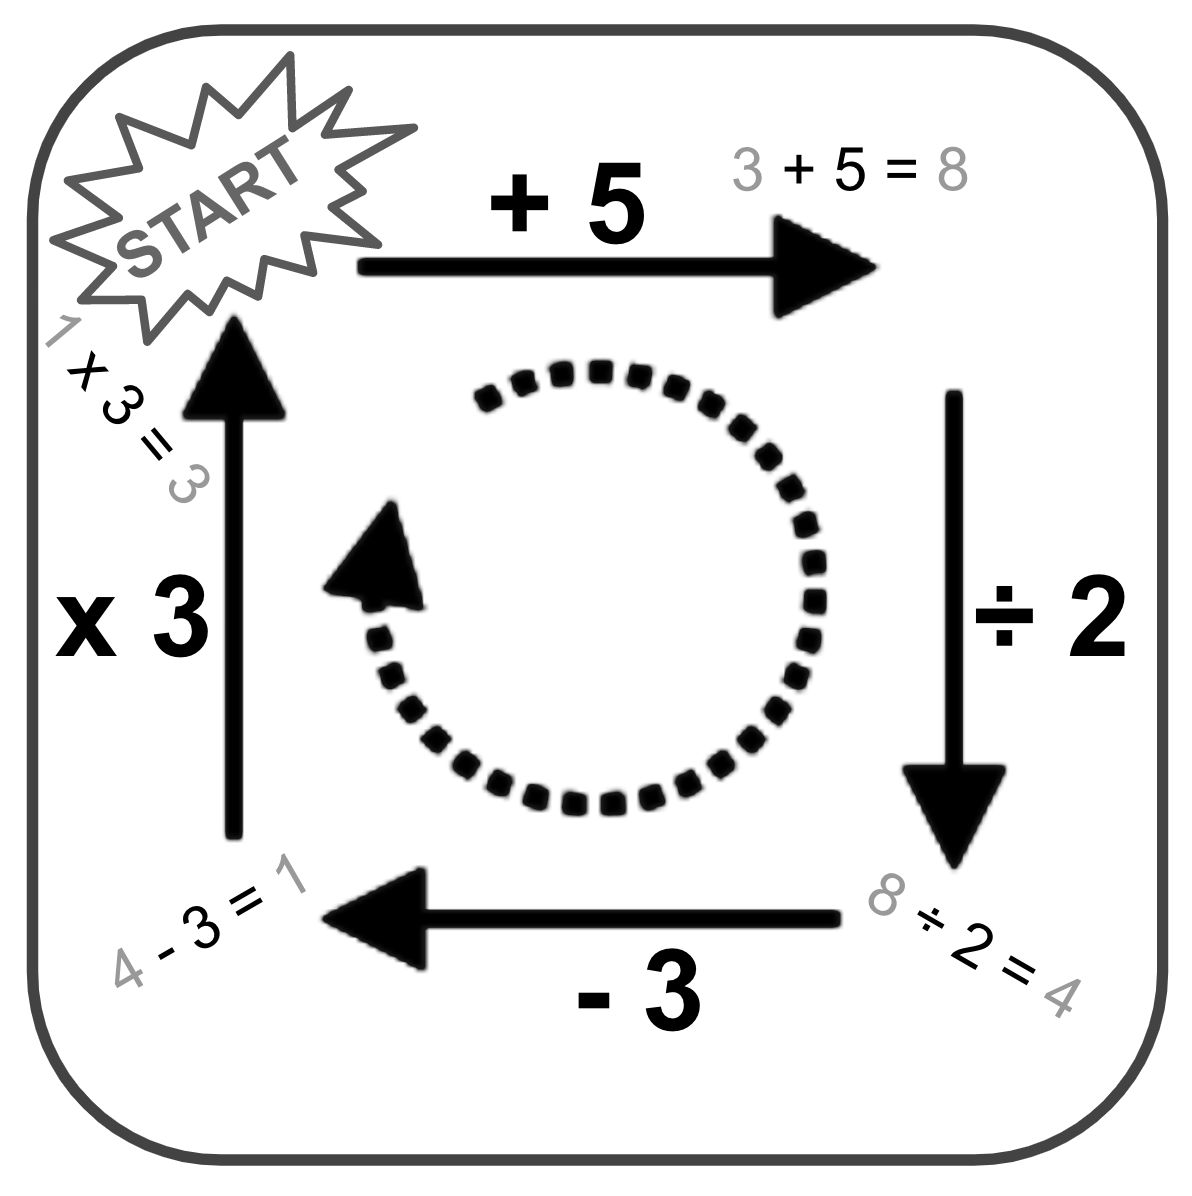 A solved example of a "Stay the Same Puzzle" consisting of a large square outline containing a starting point in the top left corner, and four arrows labelled with math operations, leading back to the starting point. The first arrow is labelled +5, the second arrow is labelled /2, the third arrow is labelled -3, and the fourth arrow is labelled x3. In between each arrow, an equation has been included to explain how to solve these puzzles: After the first arrow is 3+5=8, then after the second arrow is 8/2=4, then after the third arrow is 4-3=1, then after the fourth arrow is 1x3=3.